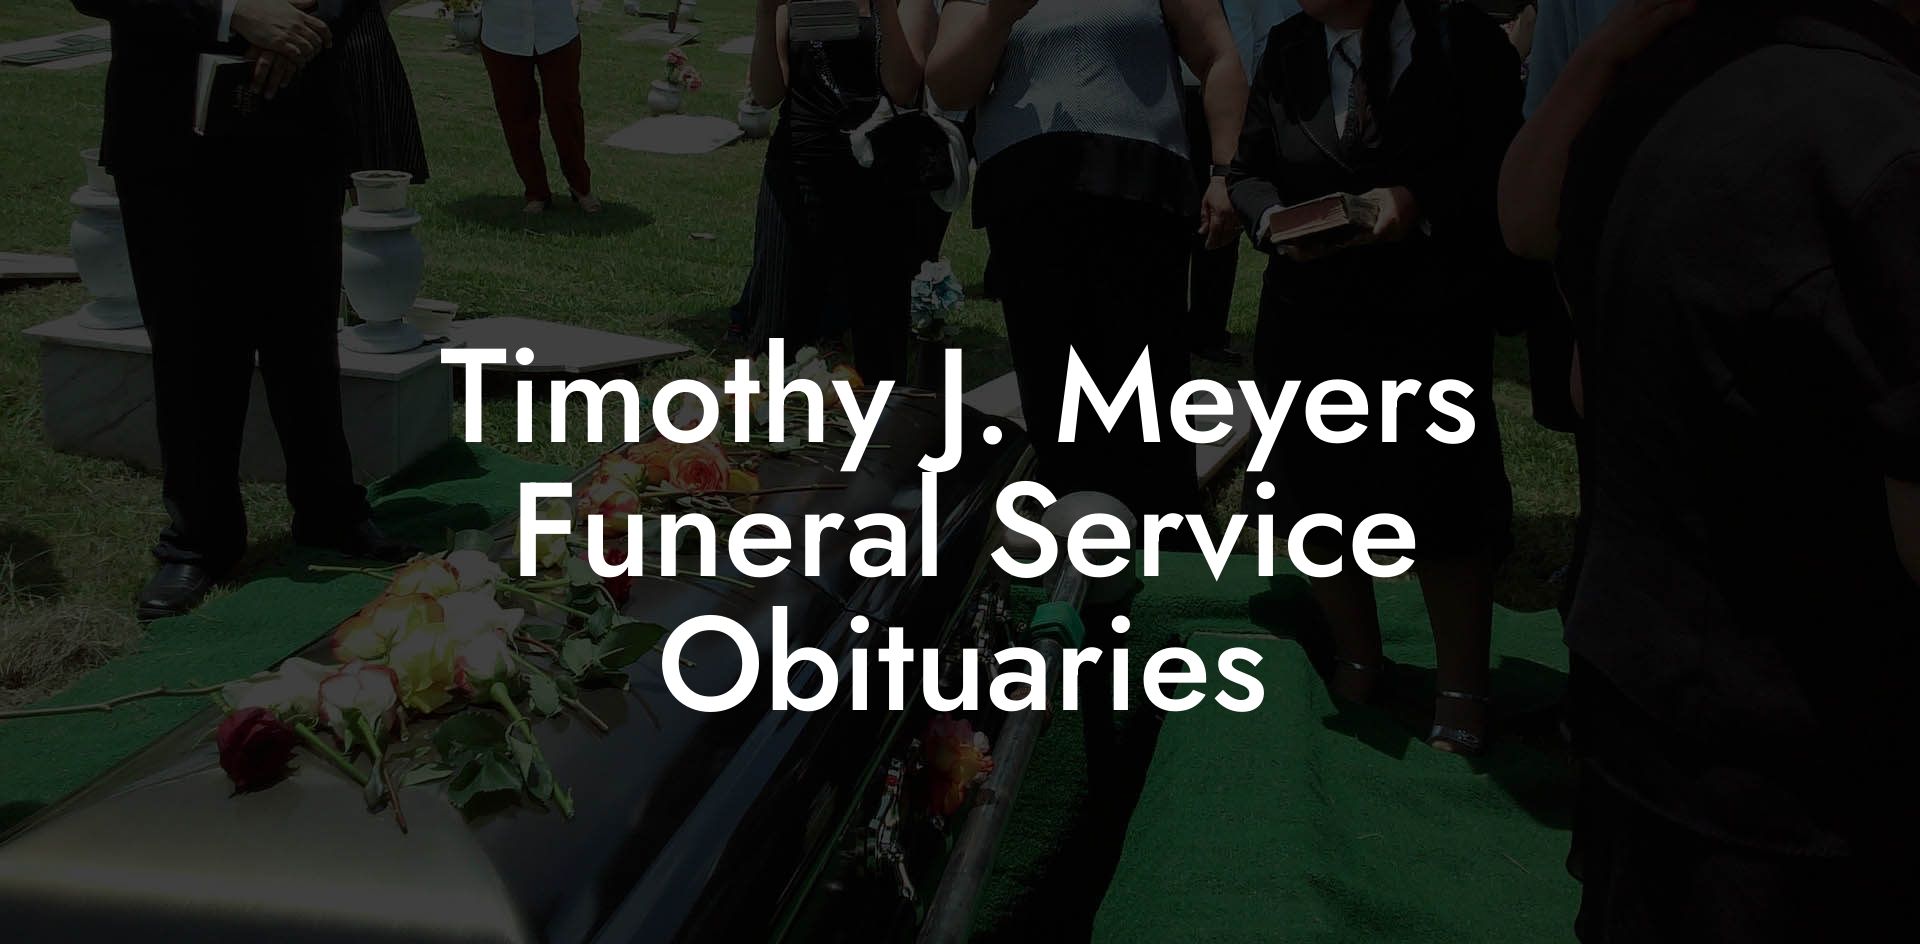 Timothy J. Meyers Funeral Service Obituaries